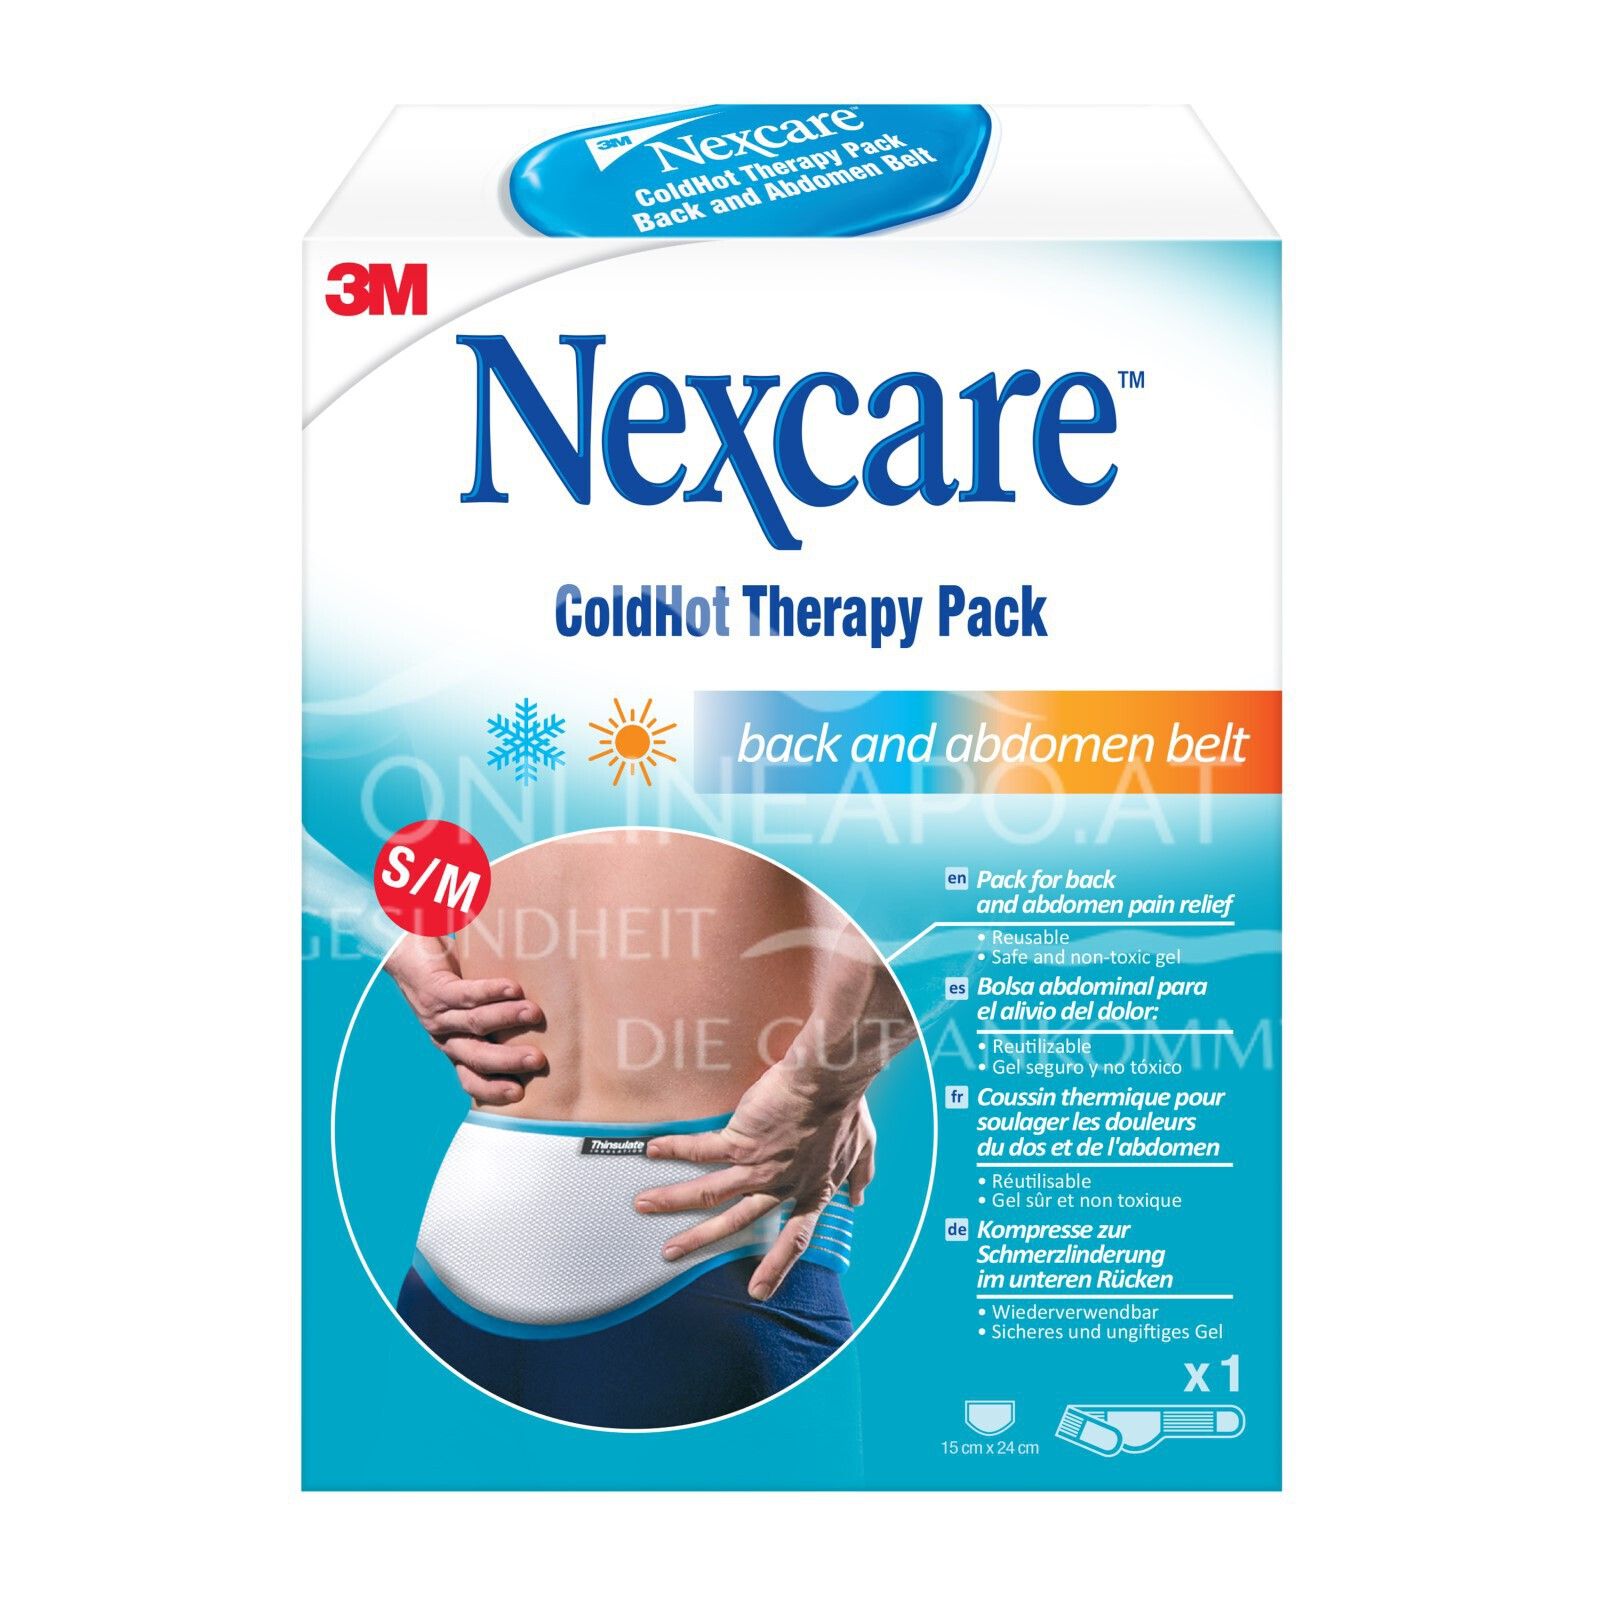 3M Nexcare™ ColdHot Therapy Pack Belt S/M